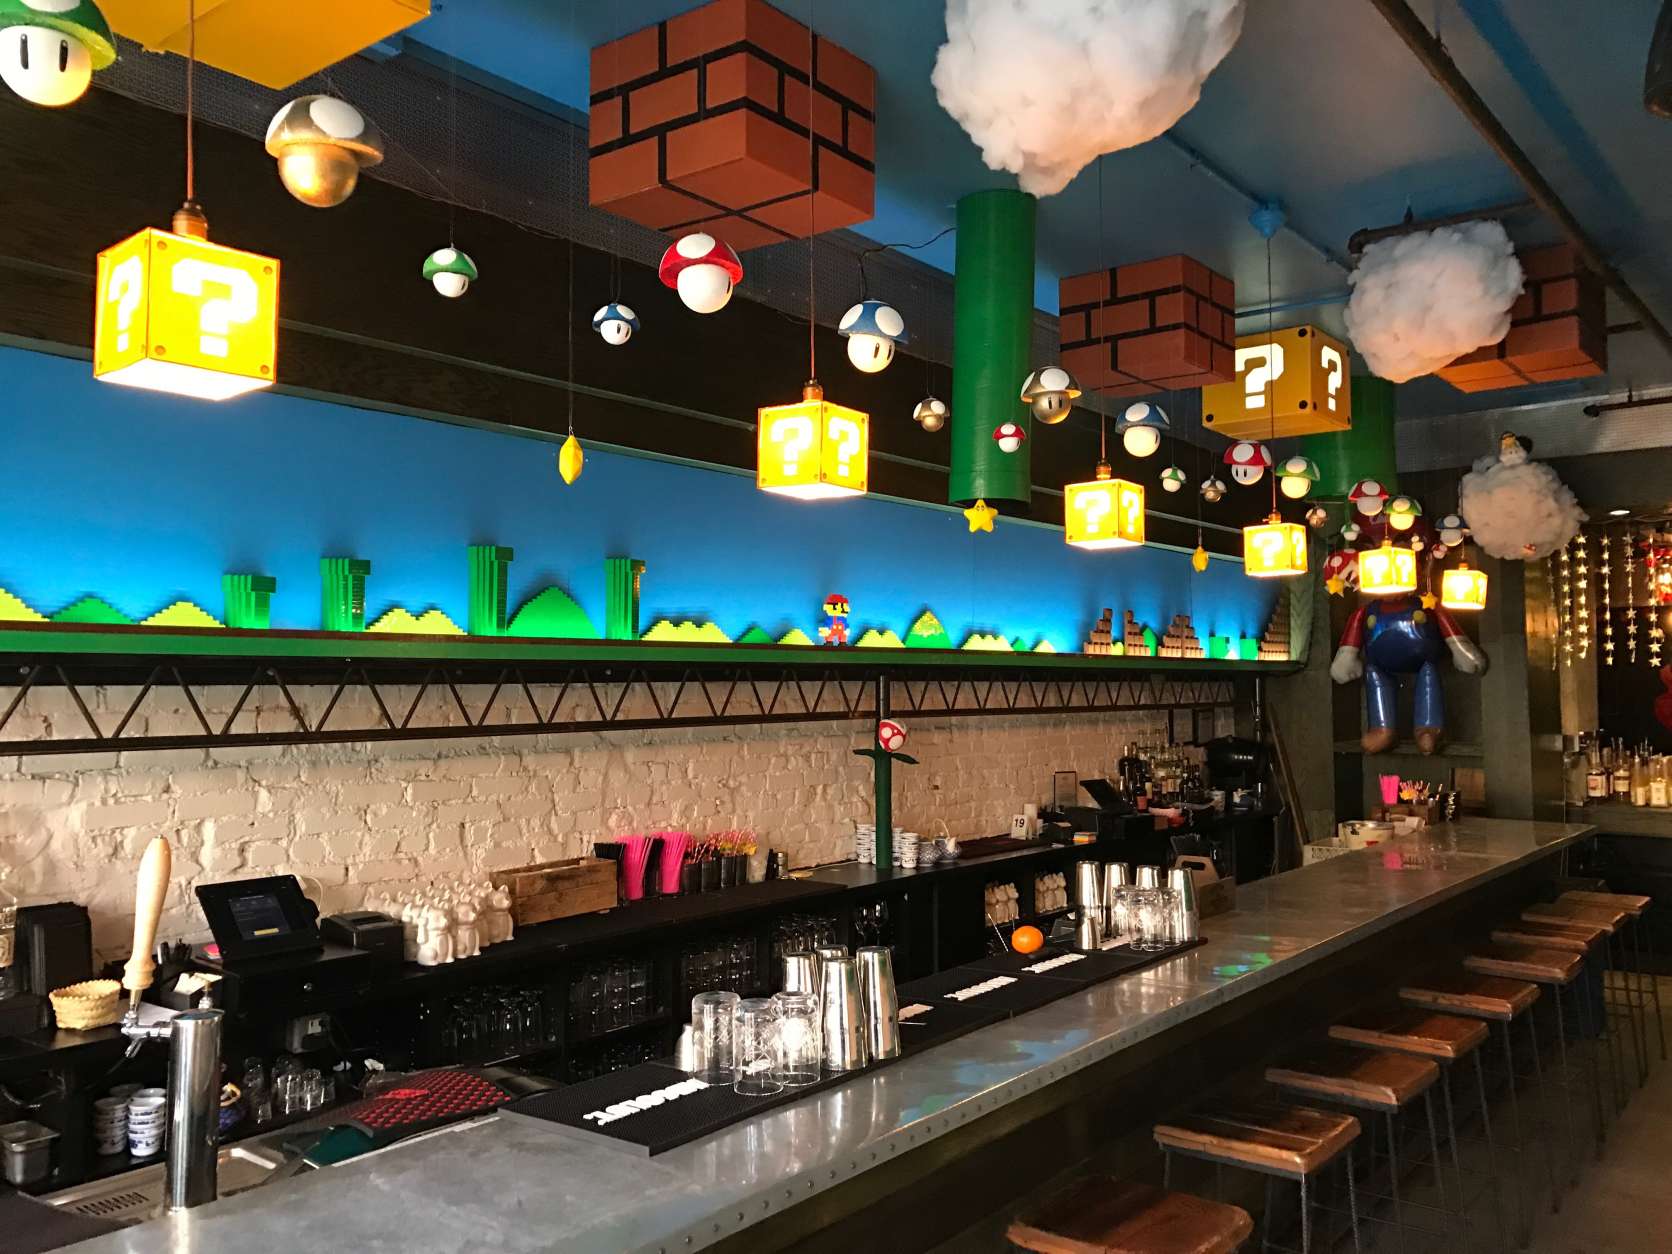 It took the team at Drink Company two months to come up with the concept, plan and execute the design said owner Derek Brown. (WTOP/Megan Cloherty)